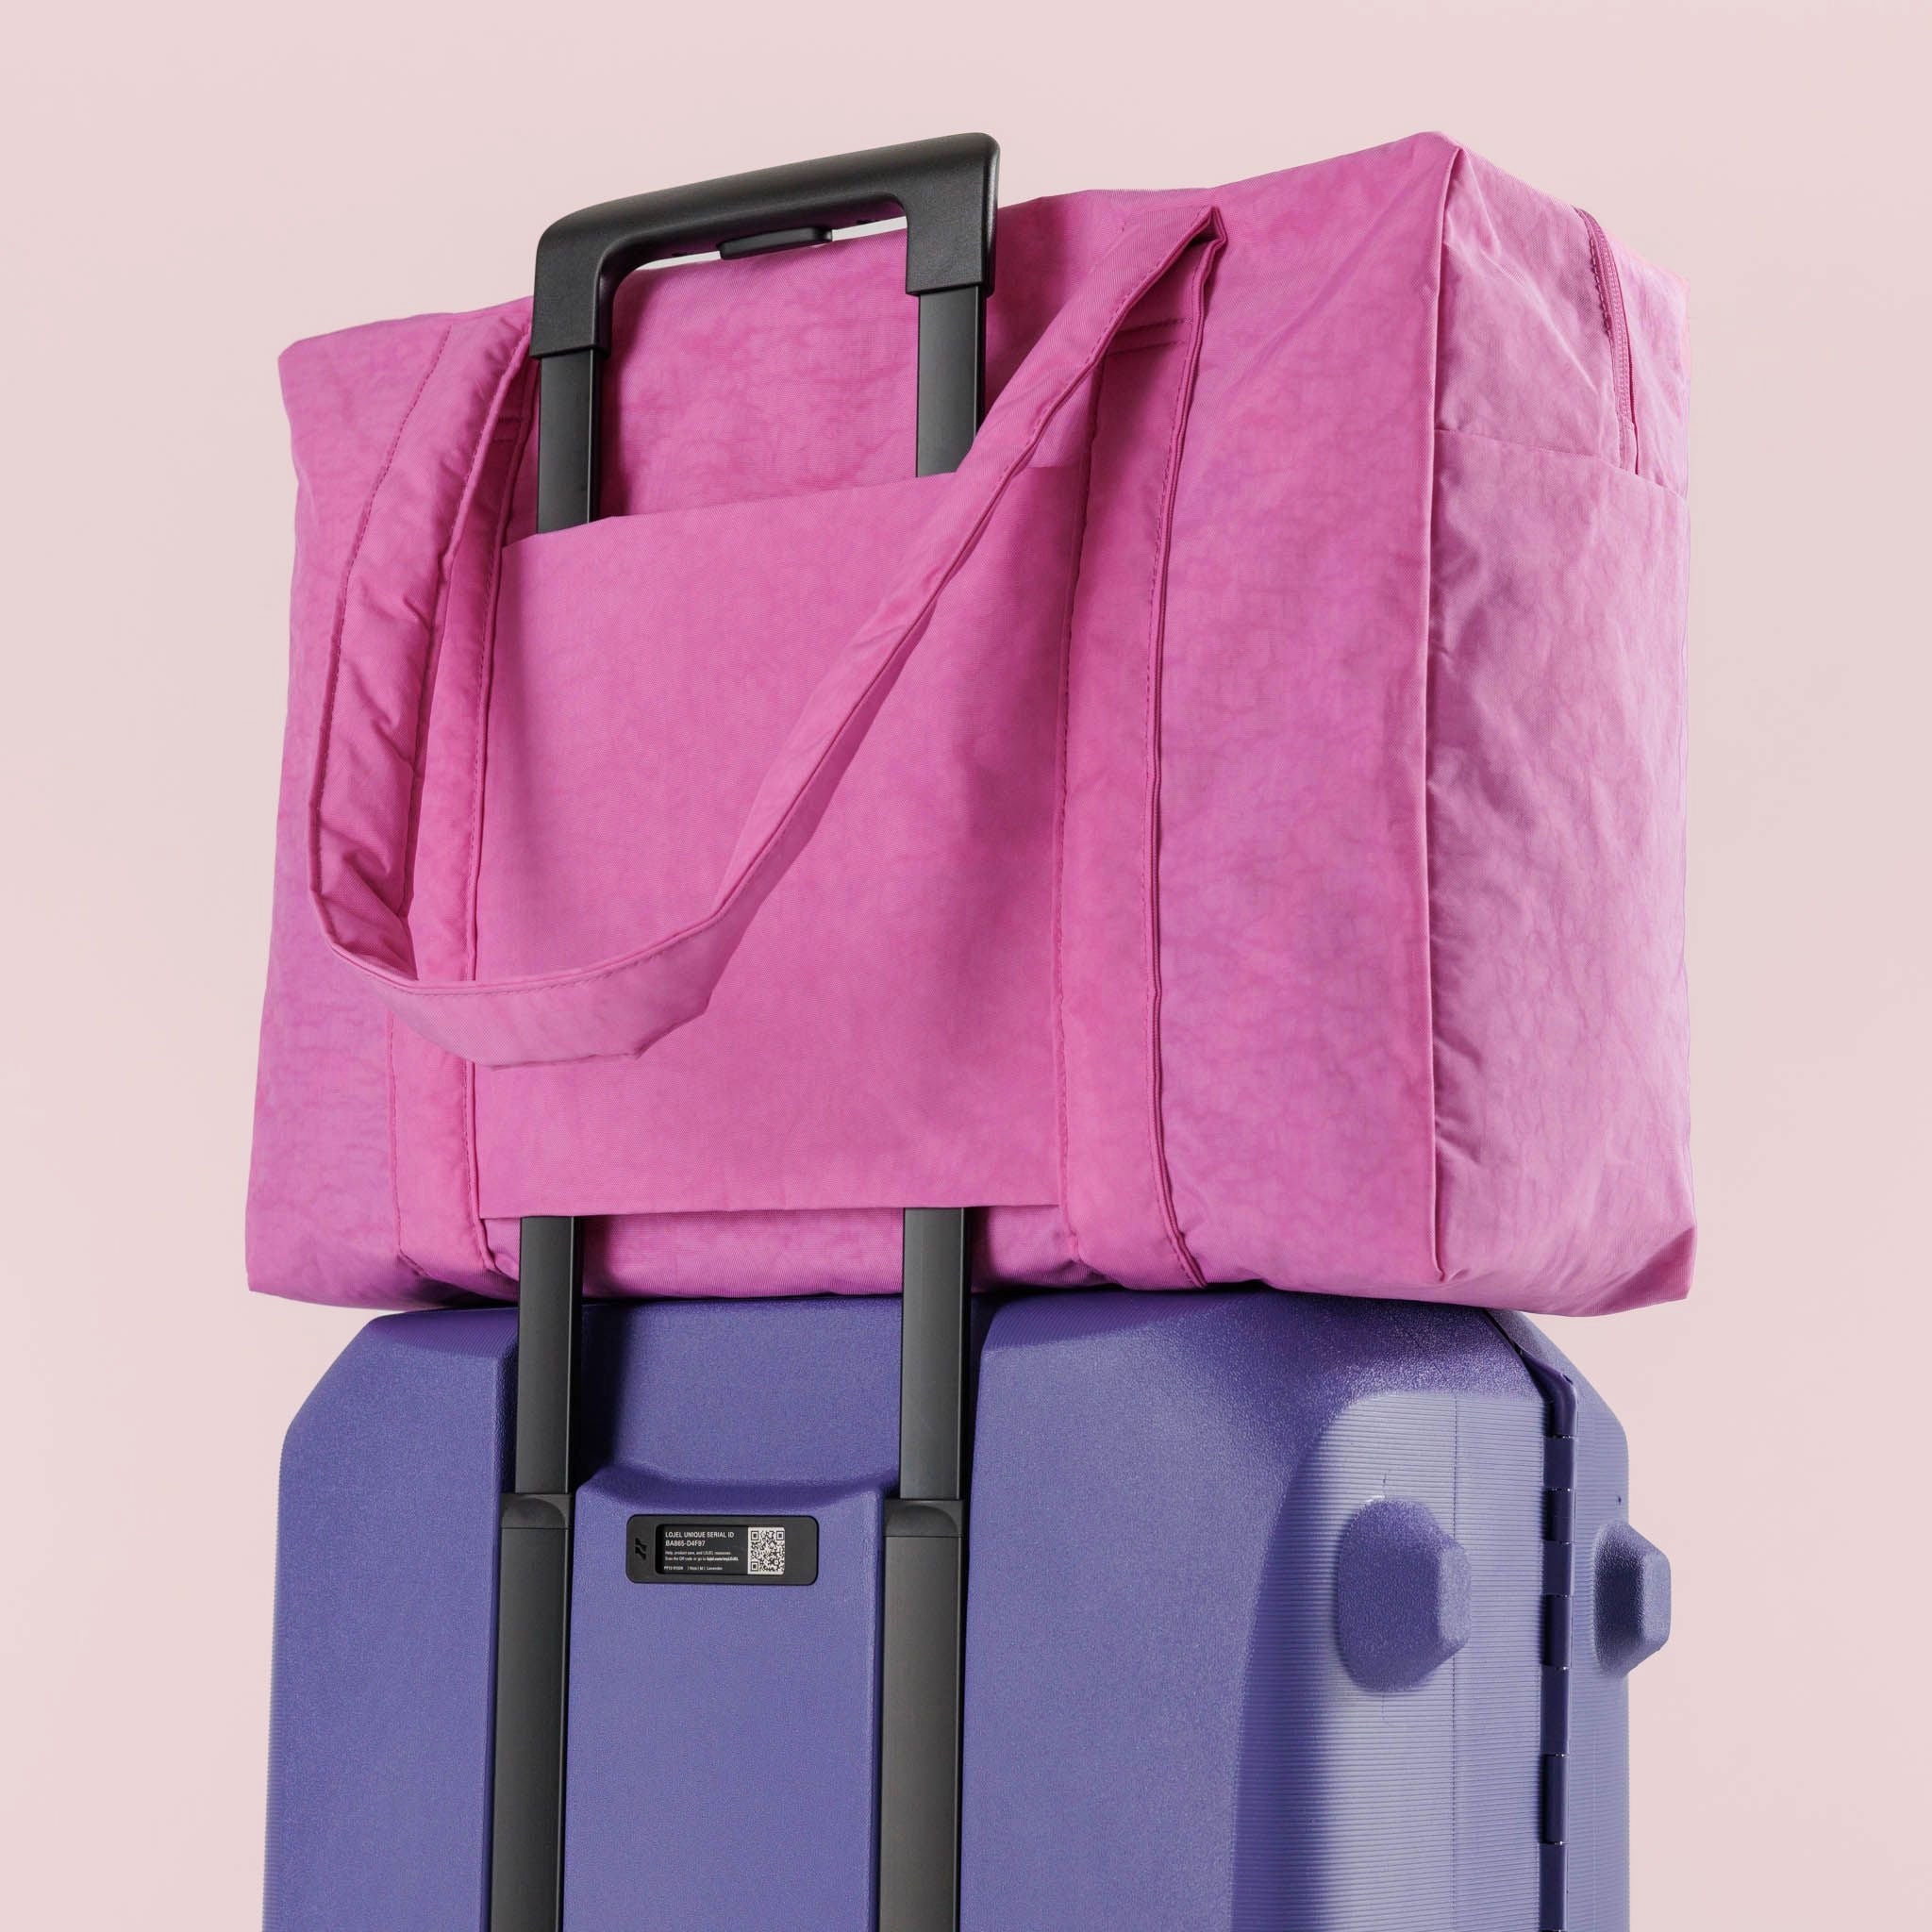 The extra pink cloud bag on a suitcase handle showing the slip feature that keeps the bag in place.